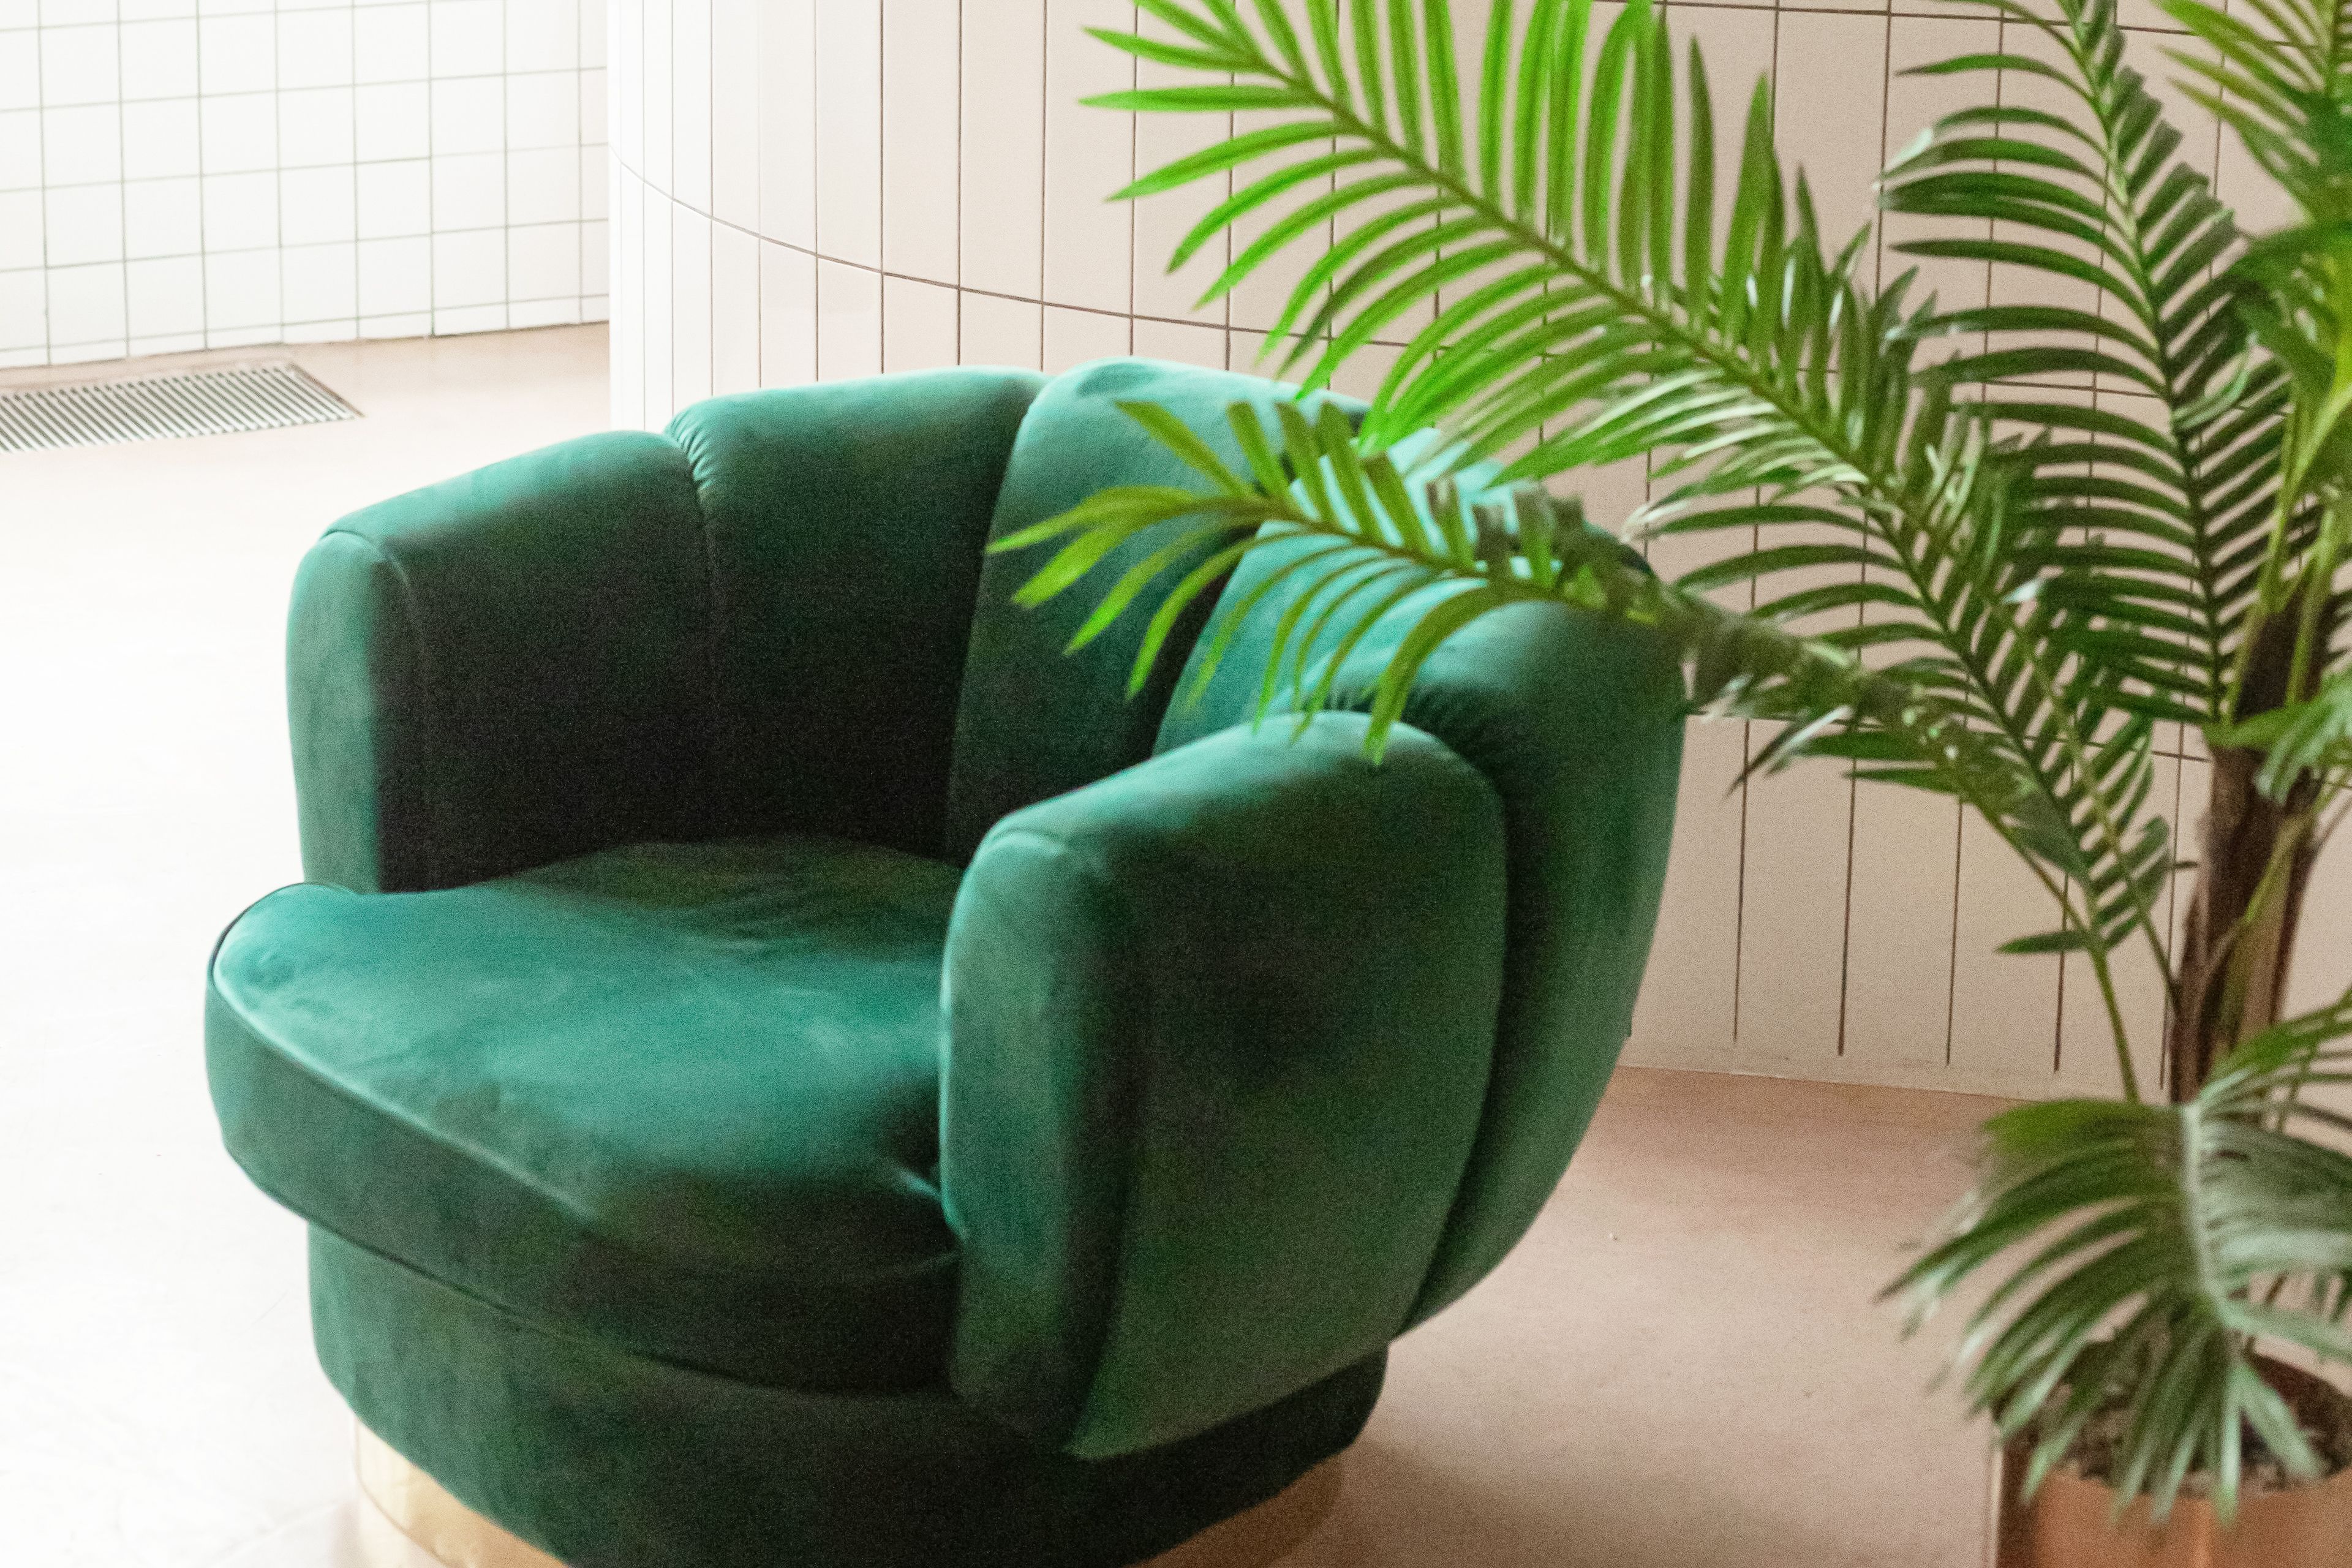 A luxury green velvet armchair with a fern in a contemporary setting.